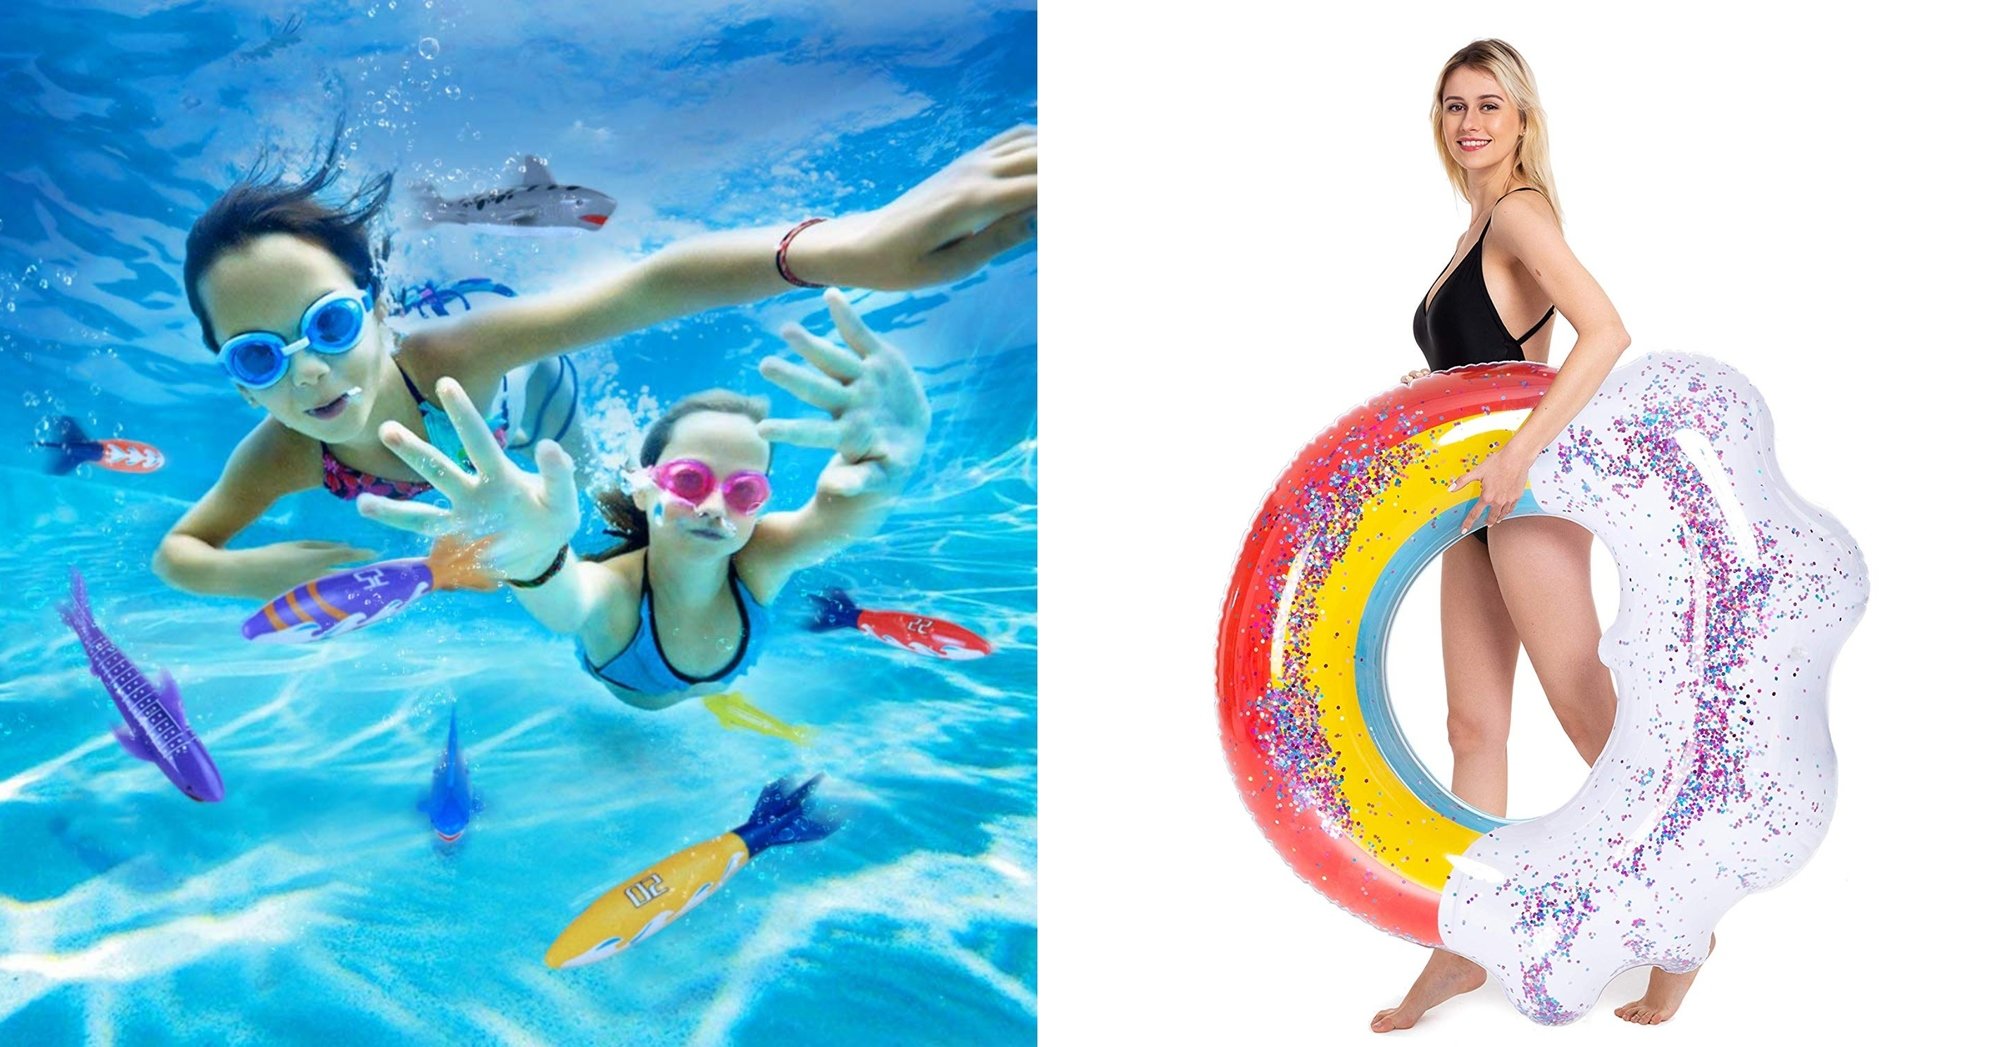 group pool floats